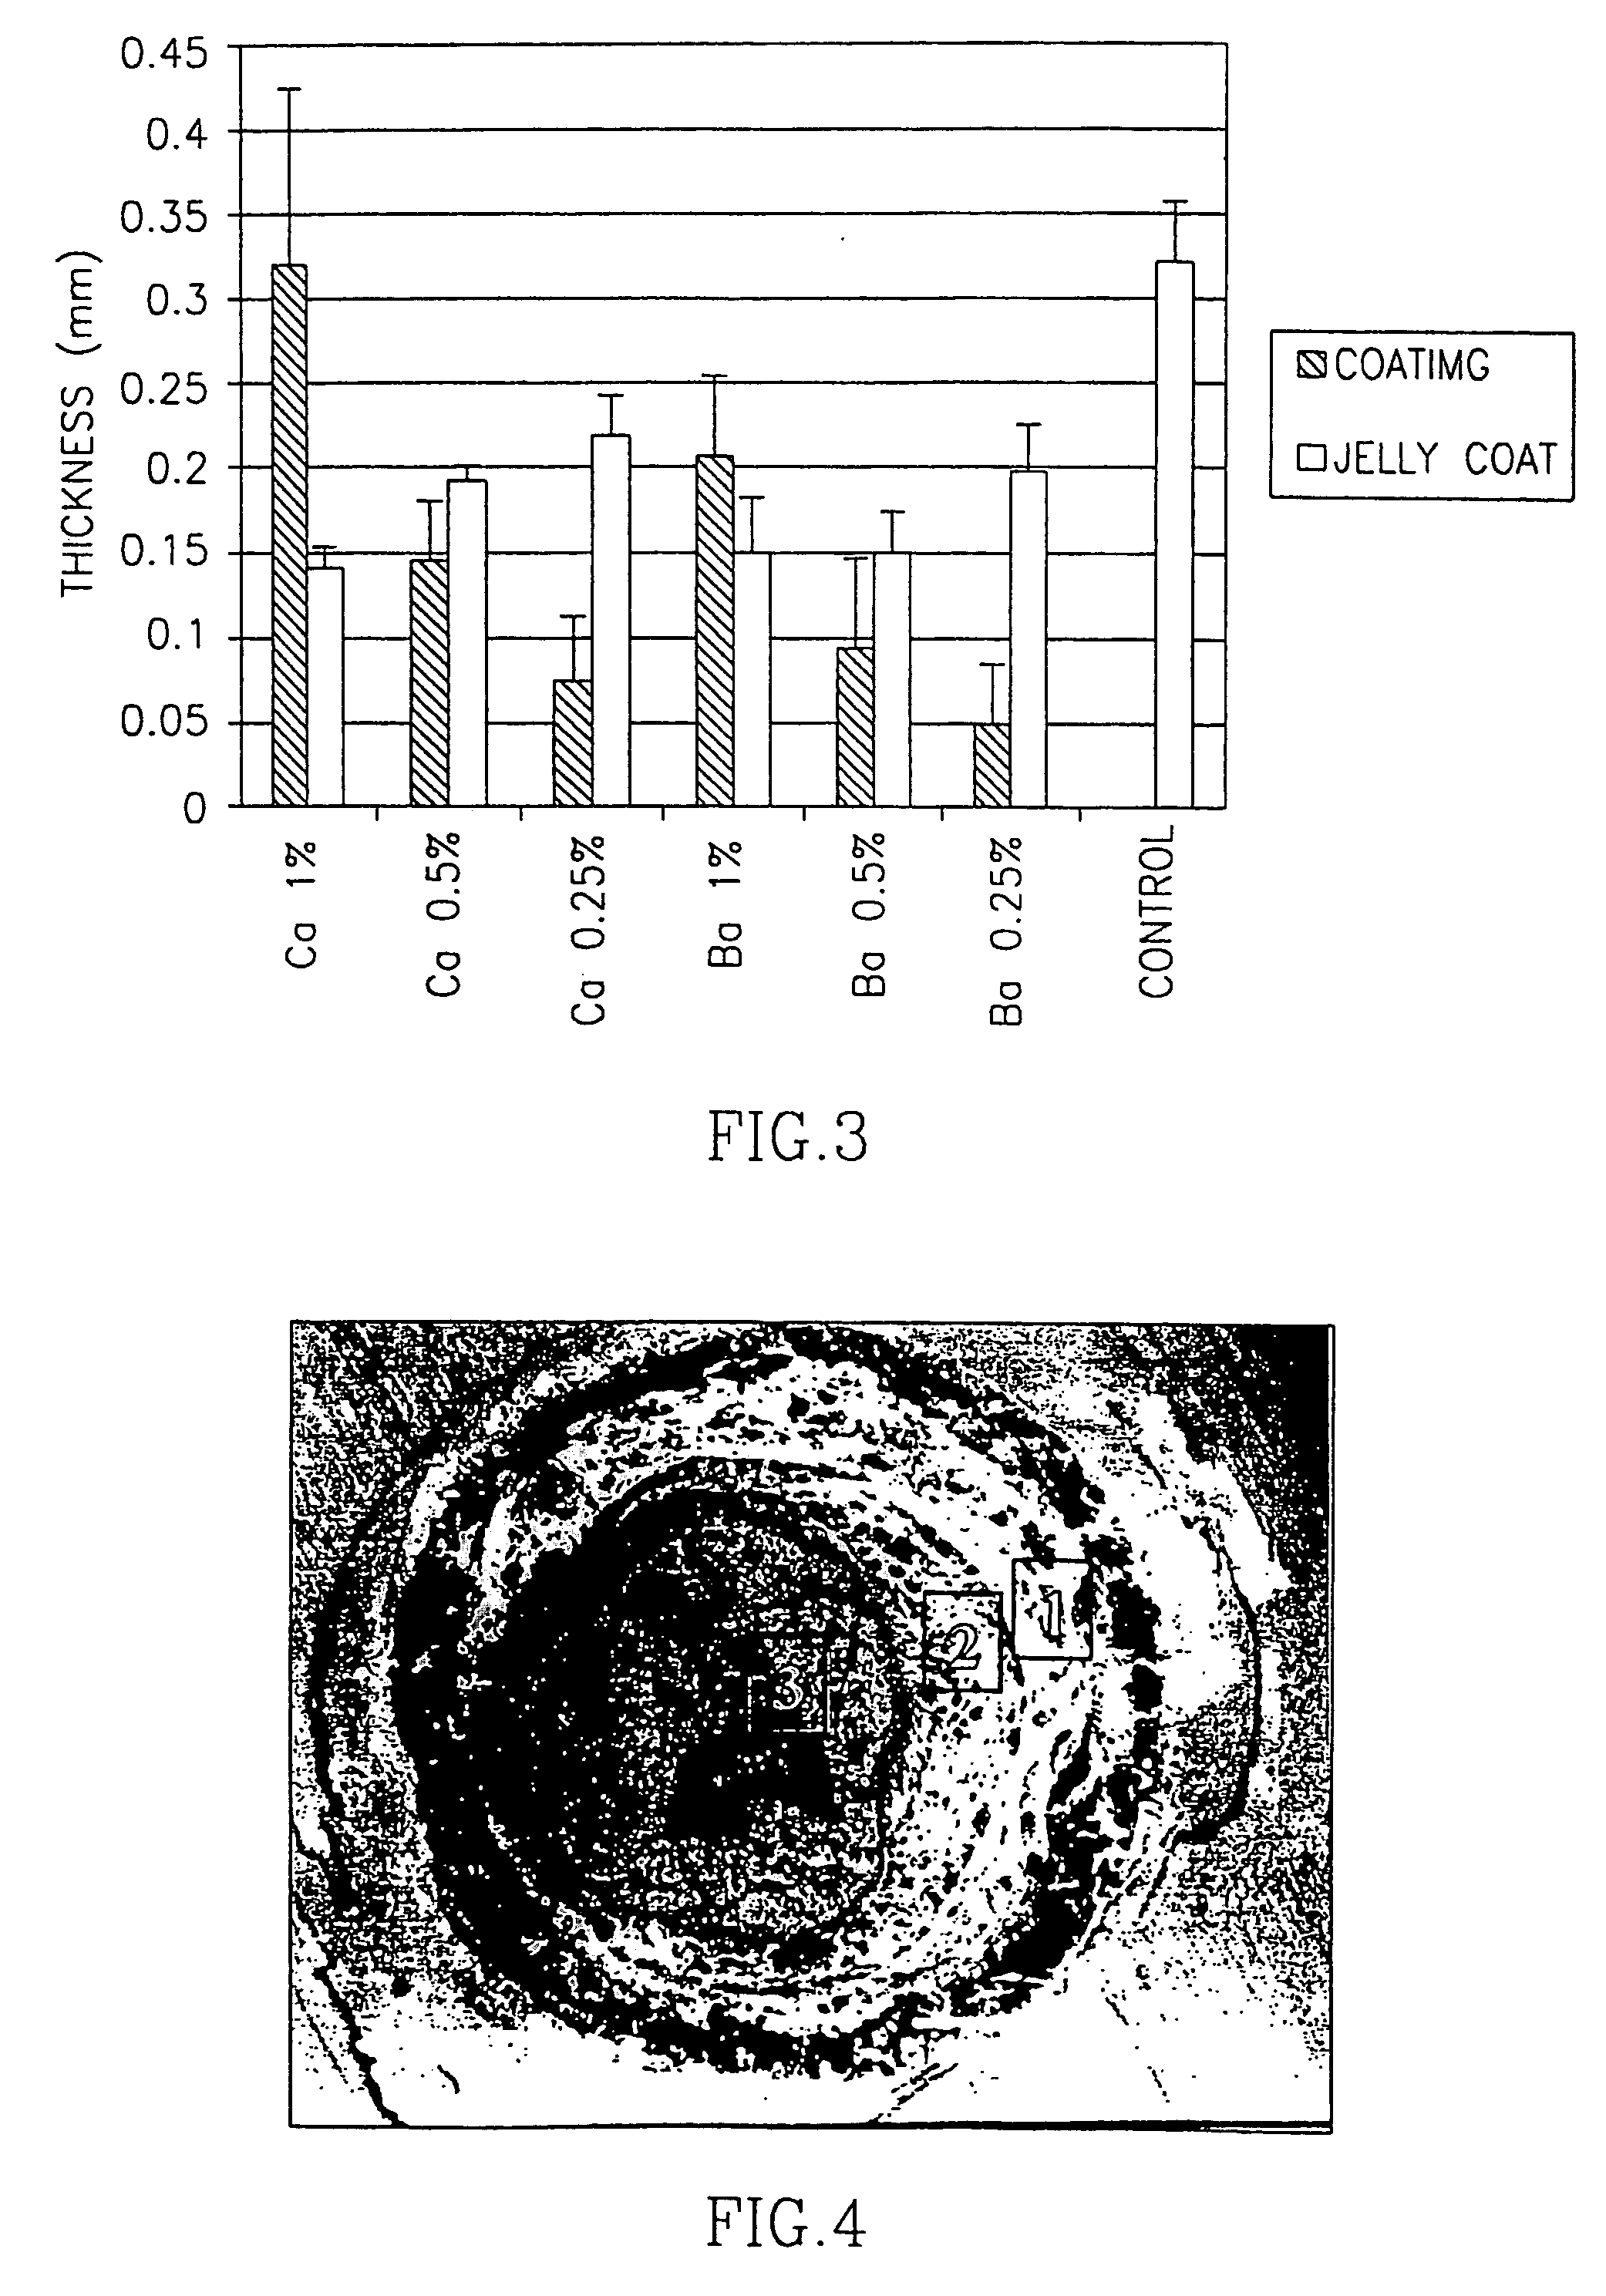 Hydrocolloid coating of a single cell or embryo